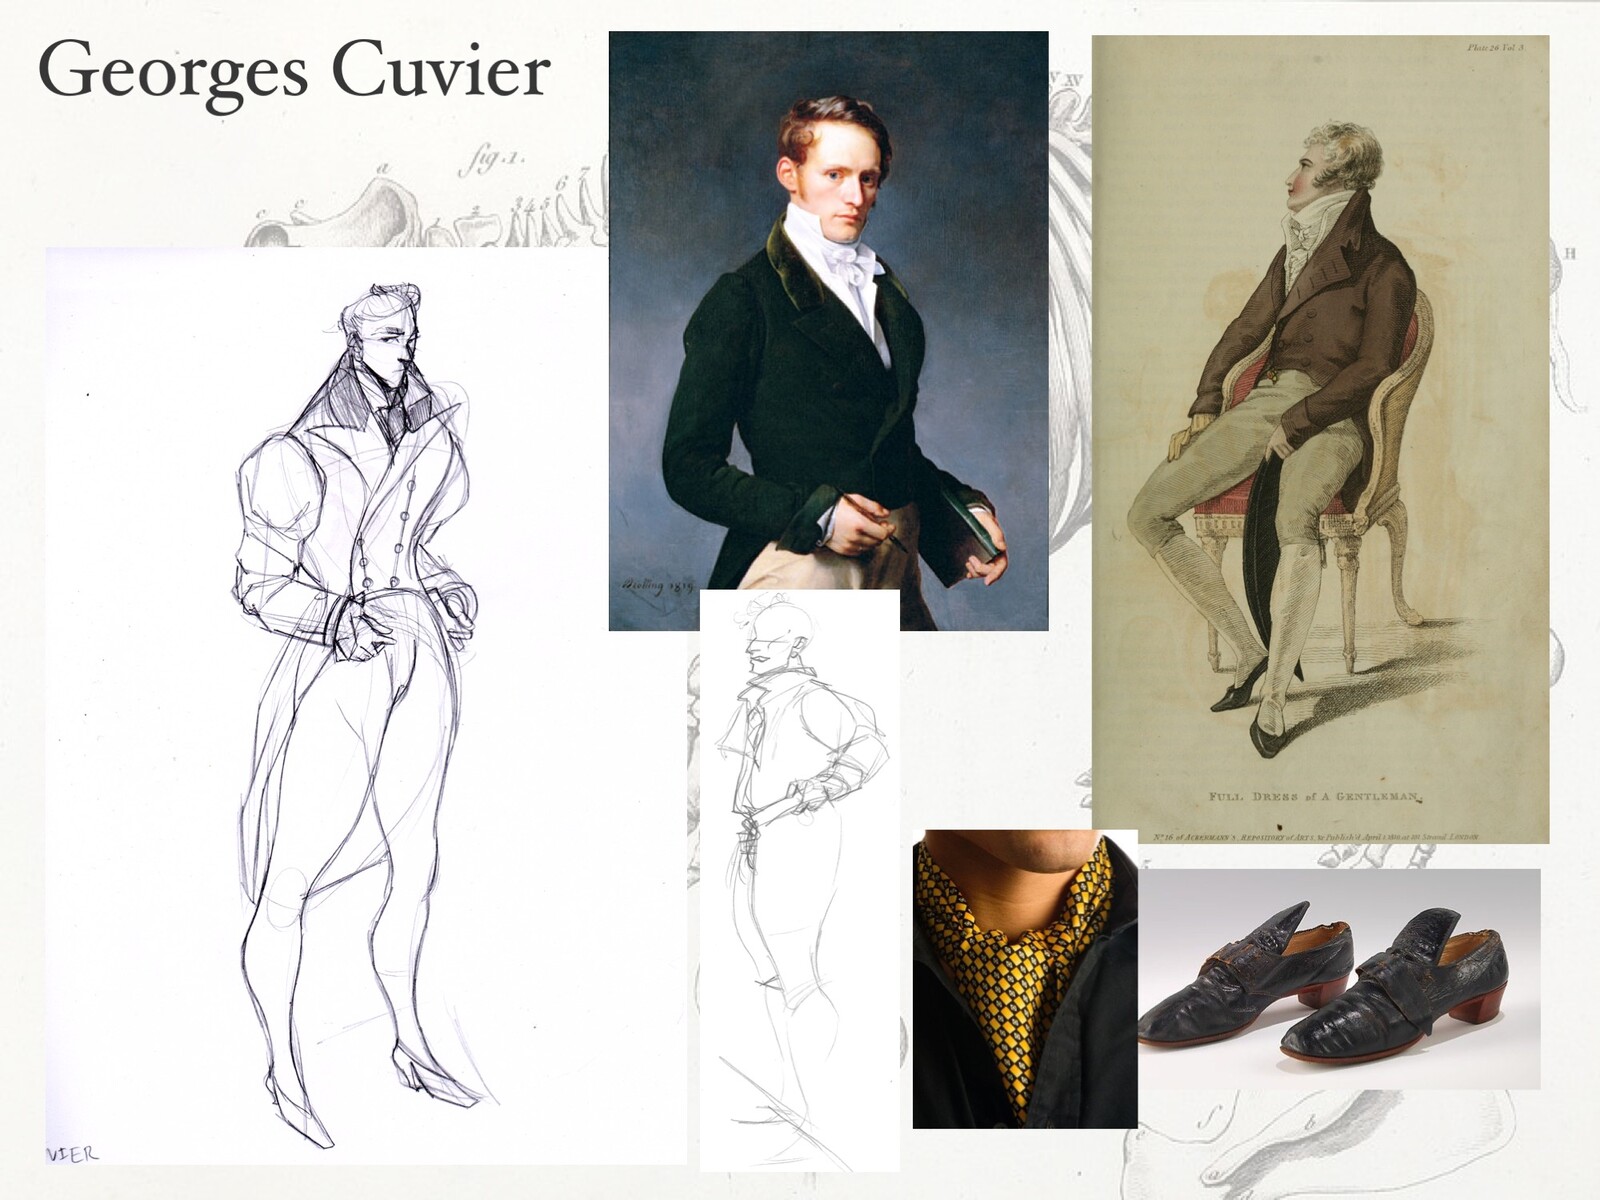 Georges Cuvier: reference. I took paintings of the actual Cuvier (a French archeologist), and exagerrated the proportion of the shoulders and the lapel. This makes him larger than life and intimiating, just like Sara might imagine him to be. 